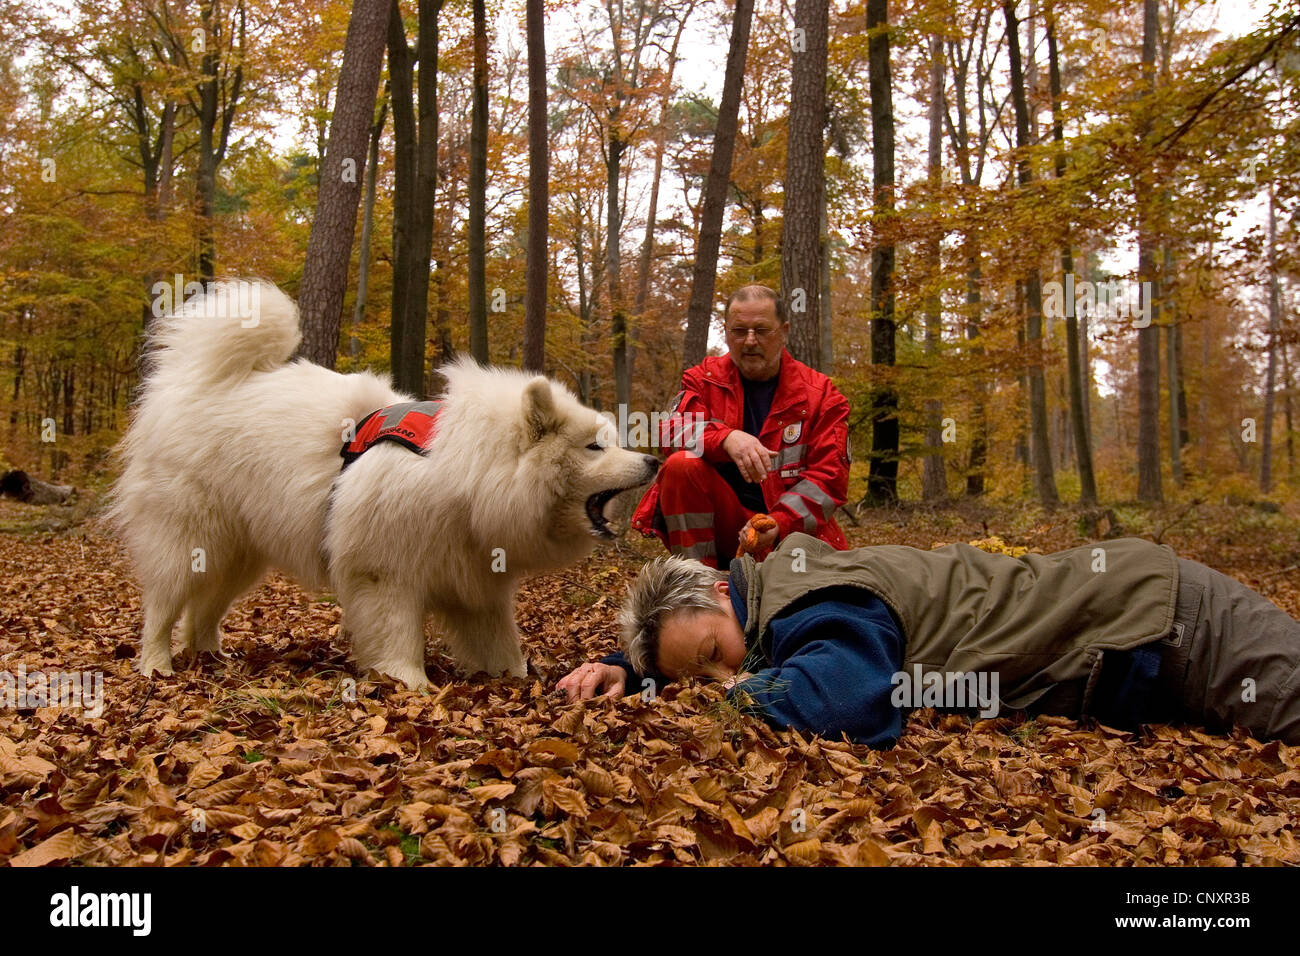 Samoyed (Canis lupus f. familiaris), rescue dog finding a person in autumn forest Stock Photo